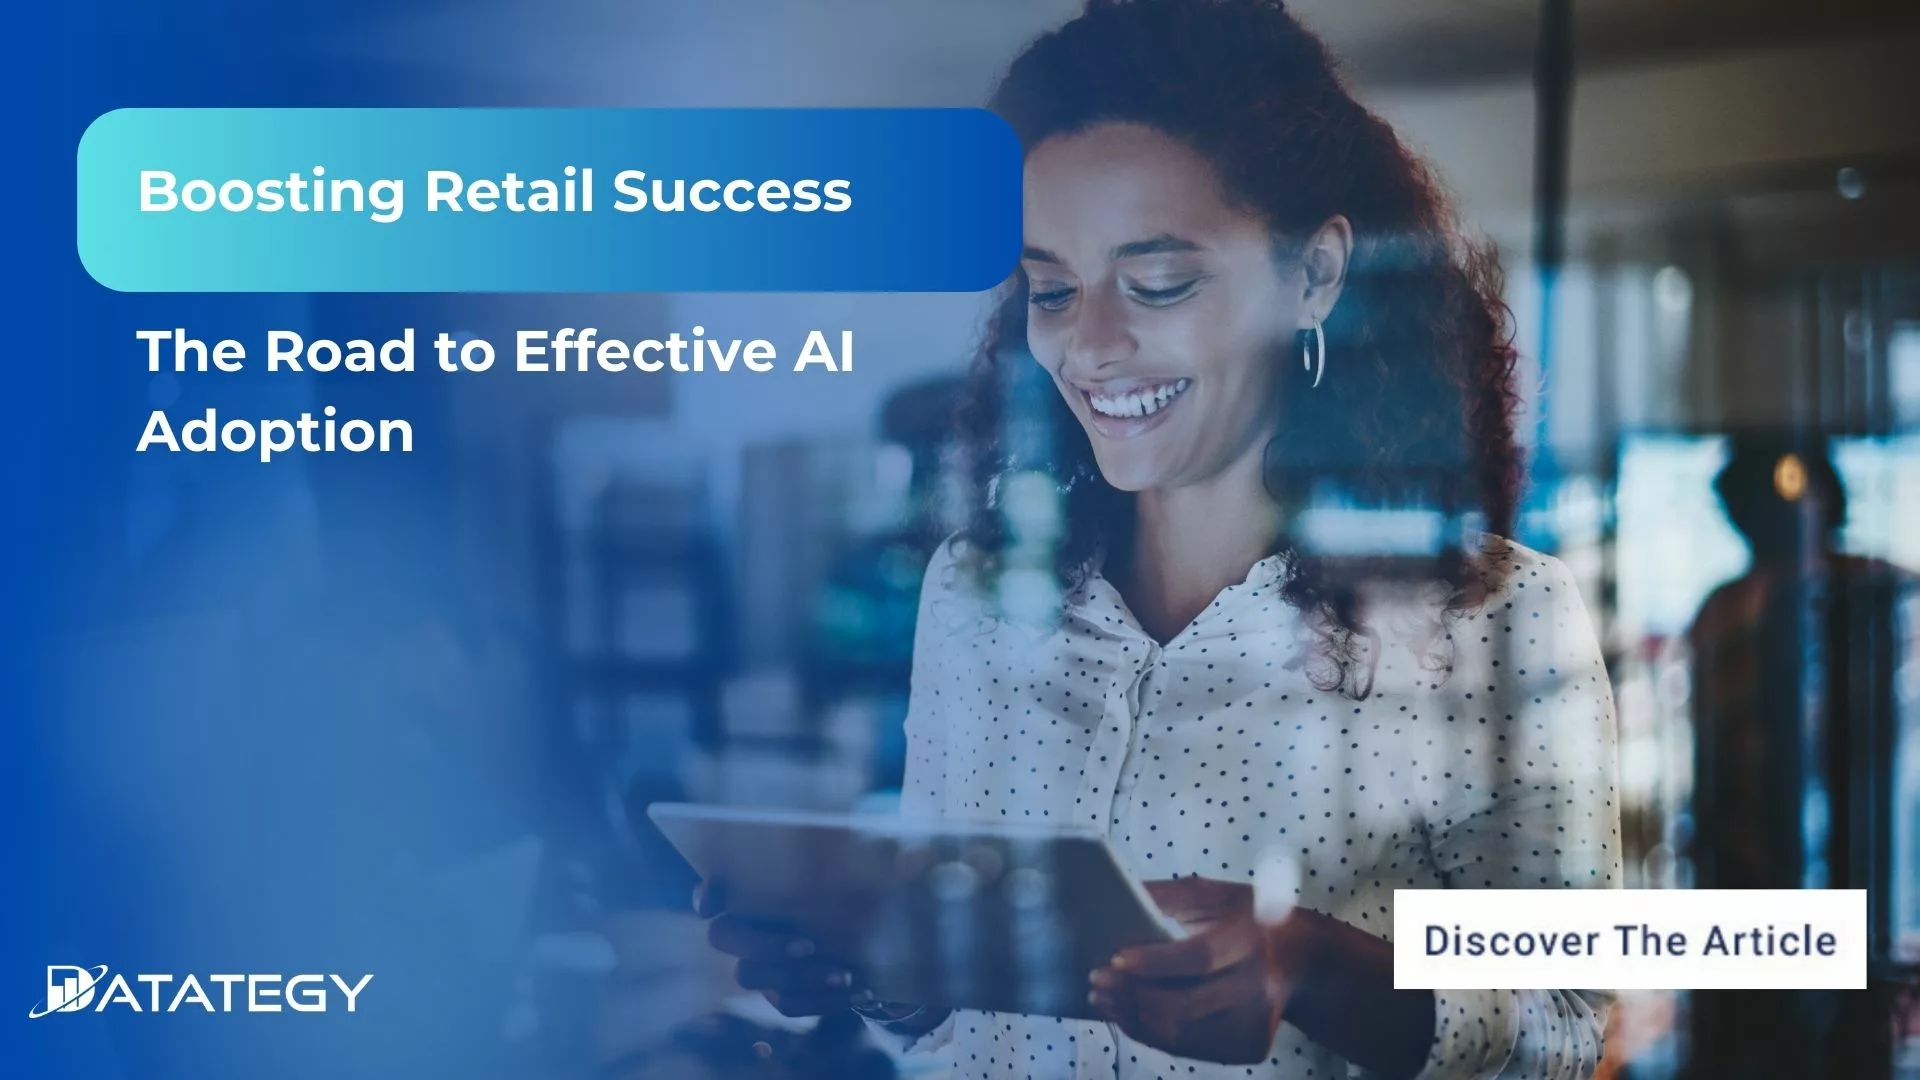 Boosting Retail Success: The Road to Effective AI Adoption